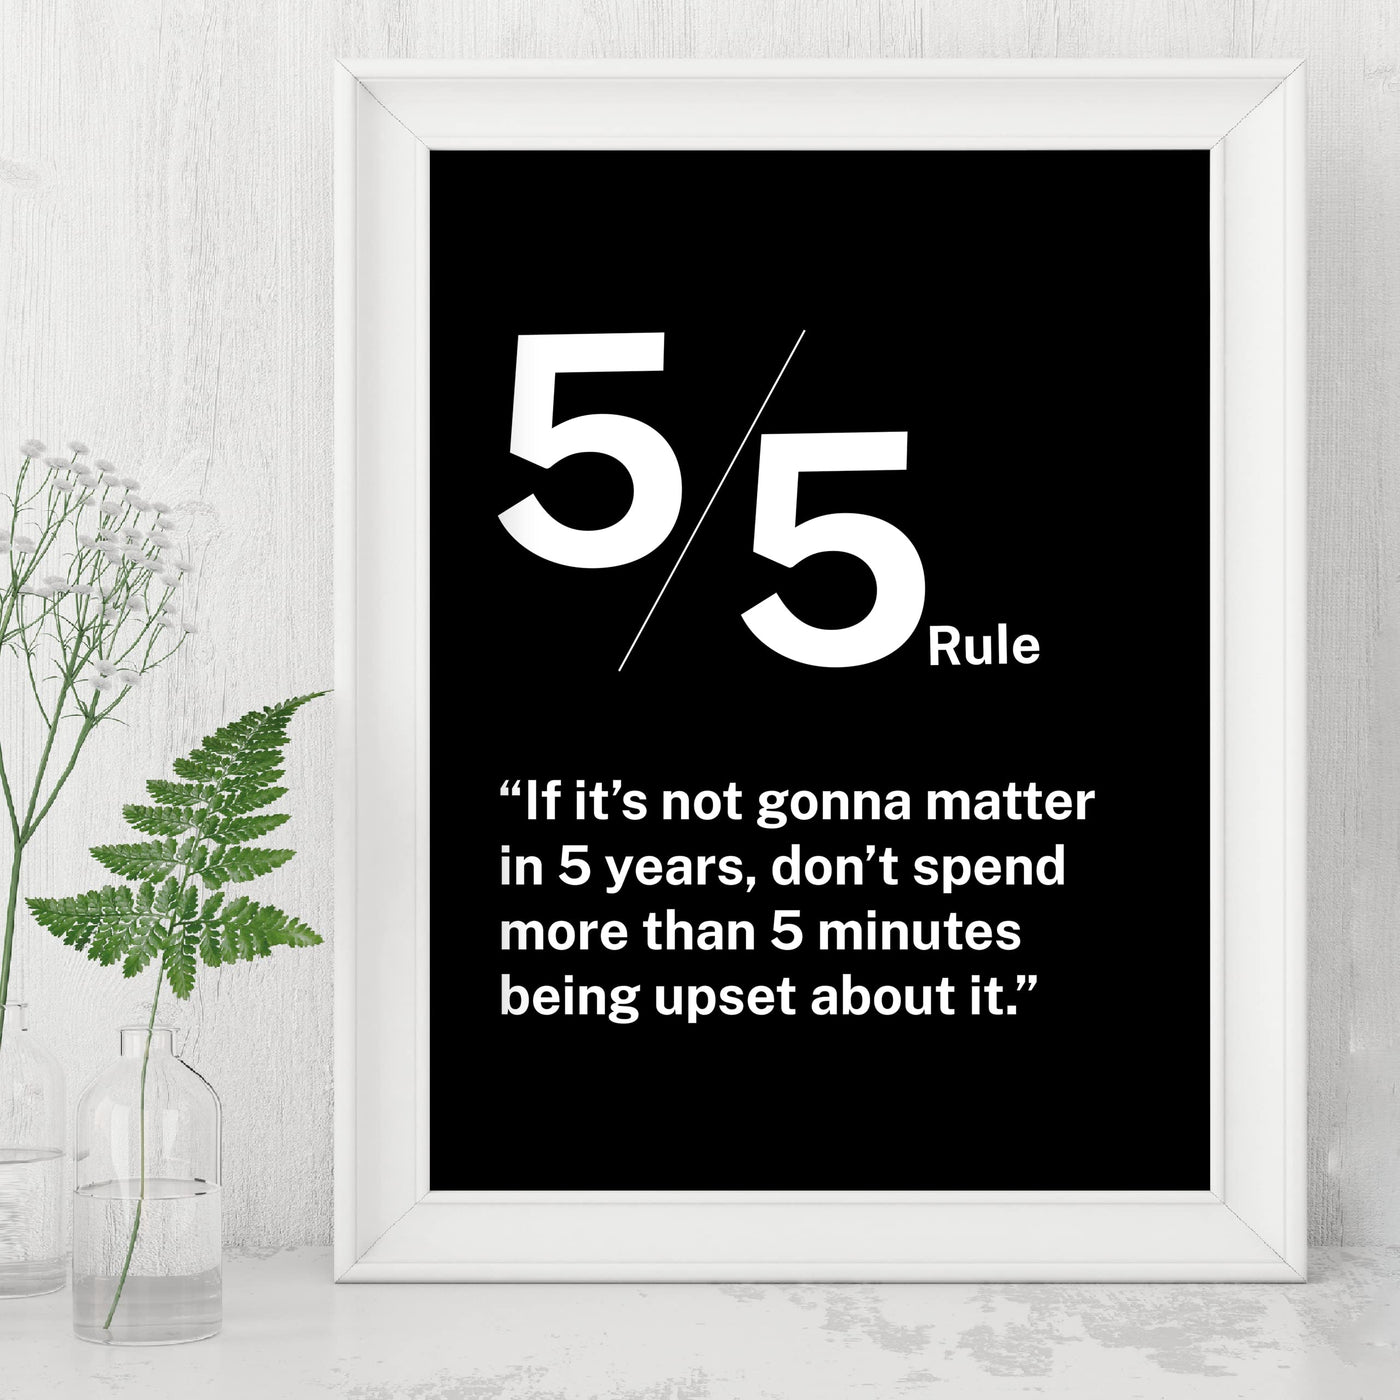 Rule of Five's- Motivational Wall Art Decor -8 x 10" Inspirational Typography Print - Ready to Frame. Modern Wall Decoration for Home-Office-Classroom-Gym-Dorm Decor. Great Gift for Motivation!